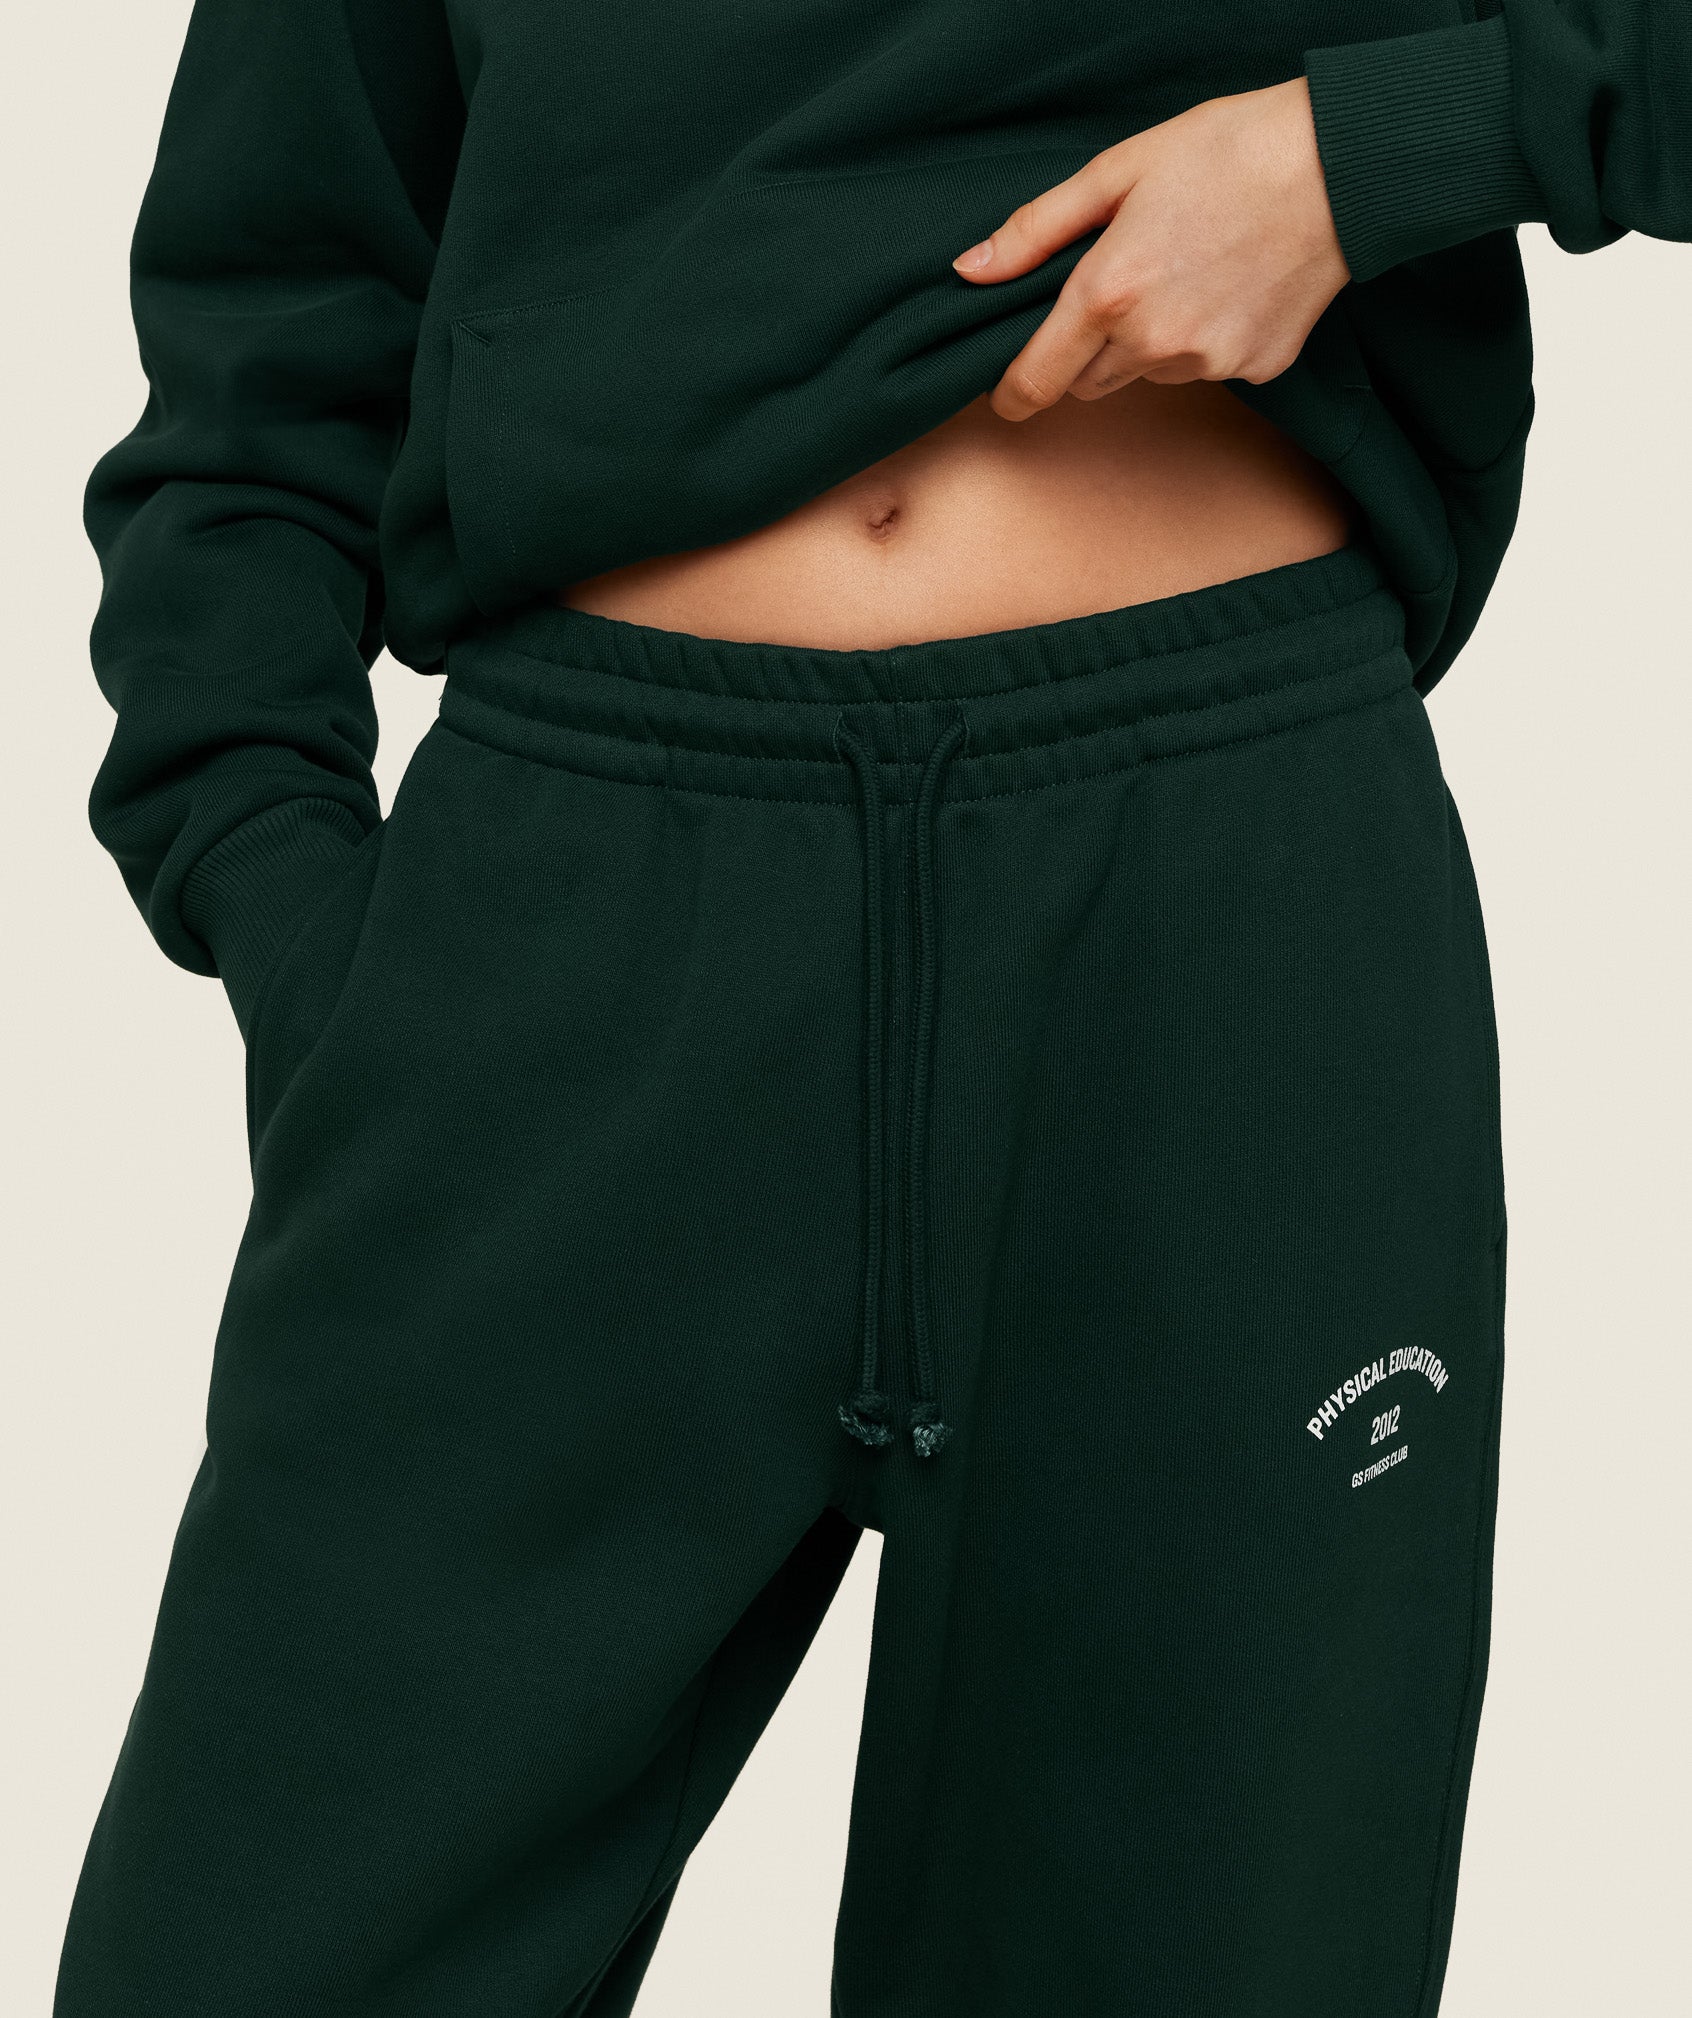 Phys Ed Graphic Sweatpants in Green - view 3